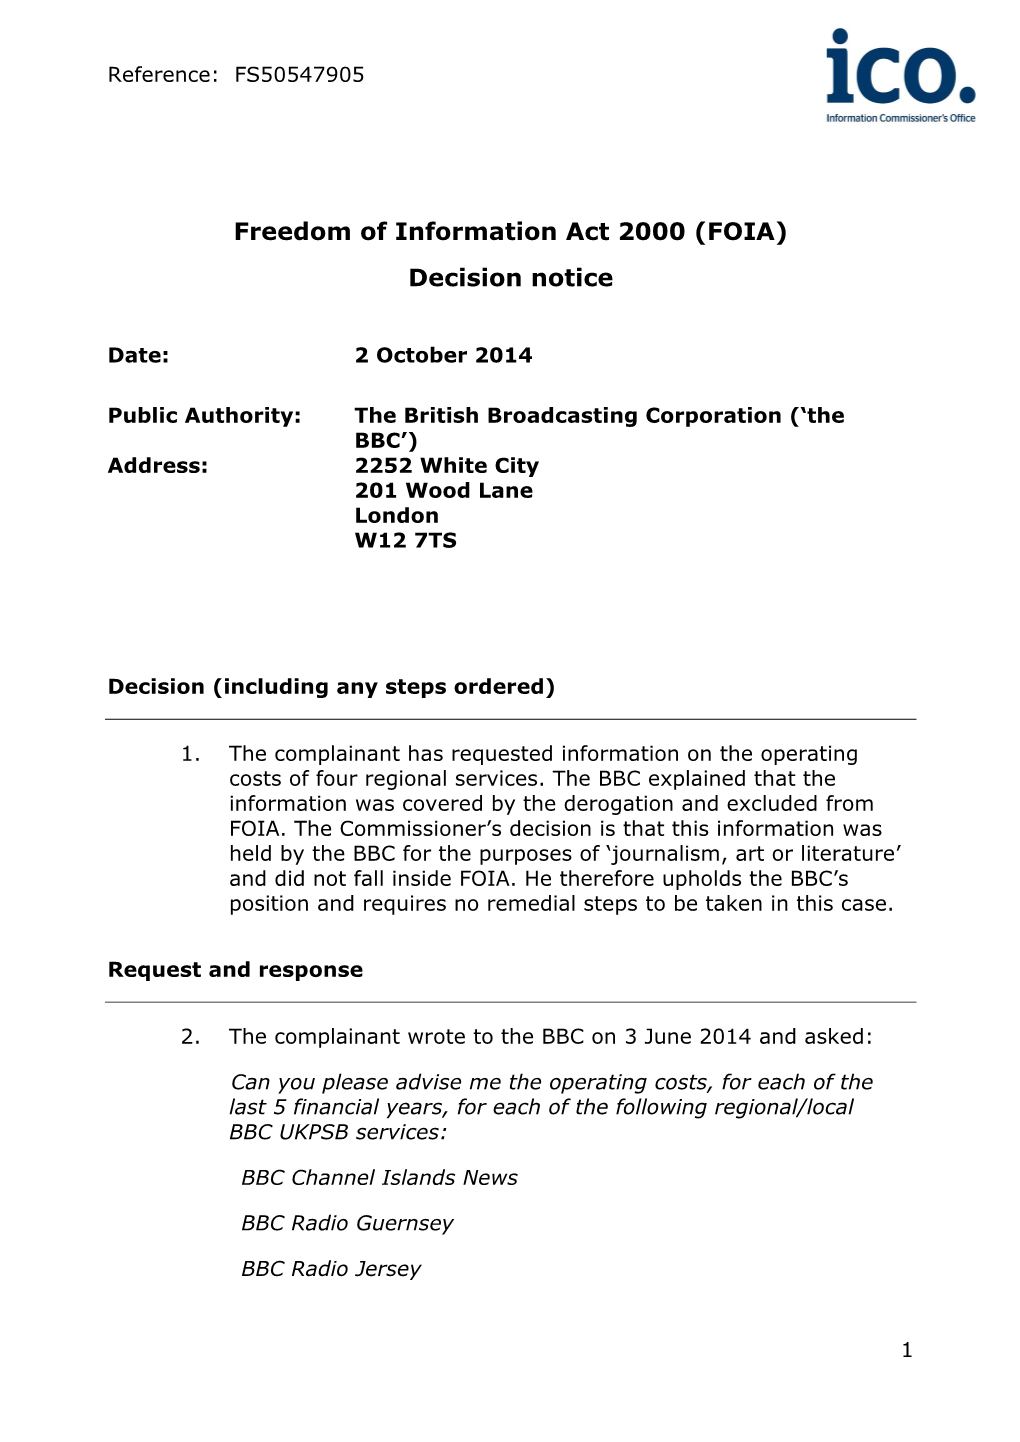 Freedom of Information Act 2000 (FOIA) Decision Notice